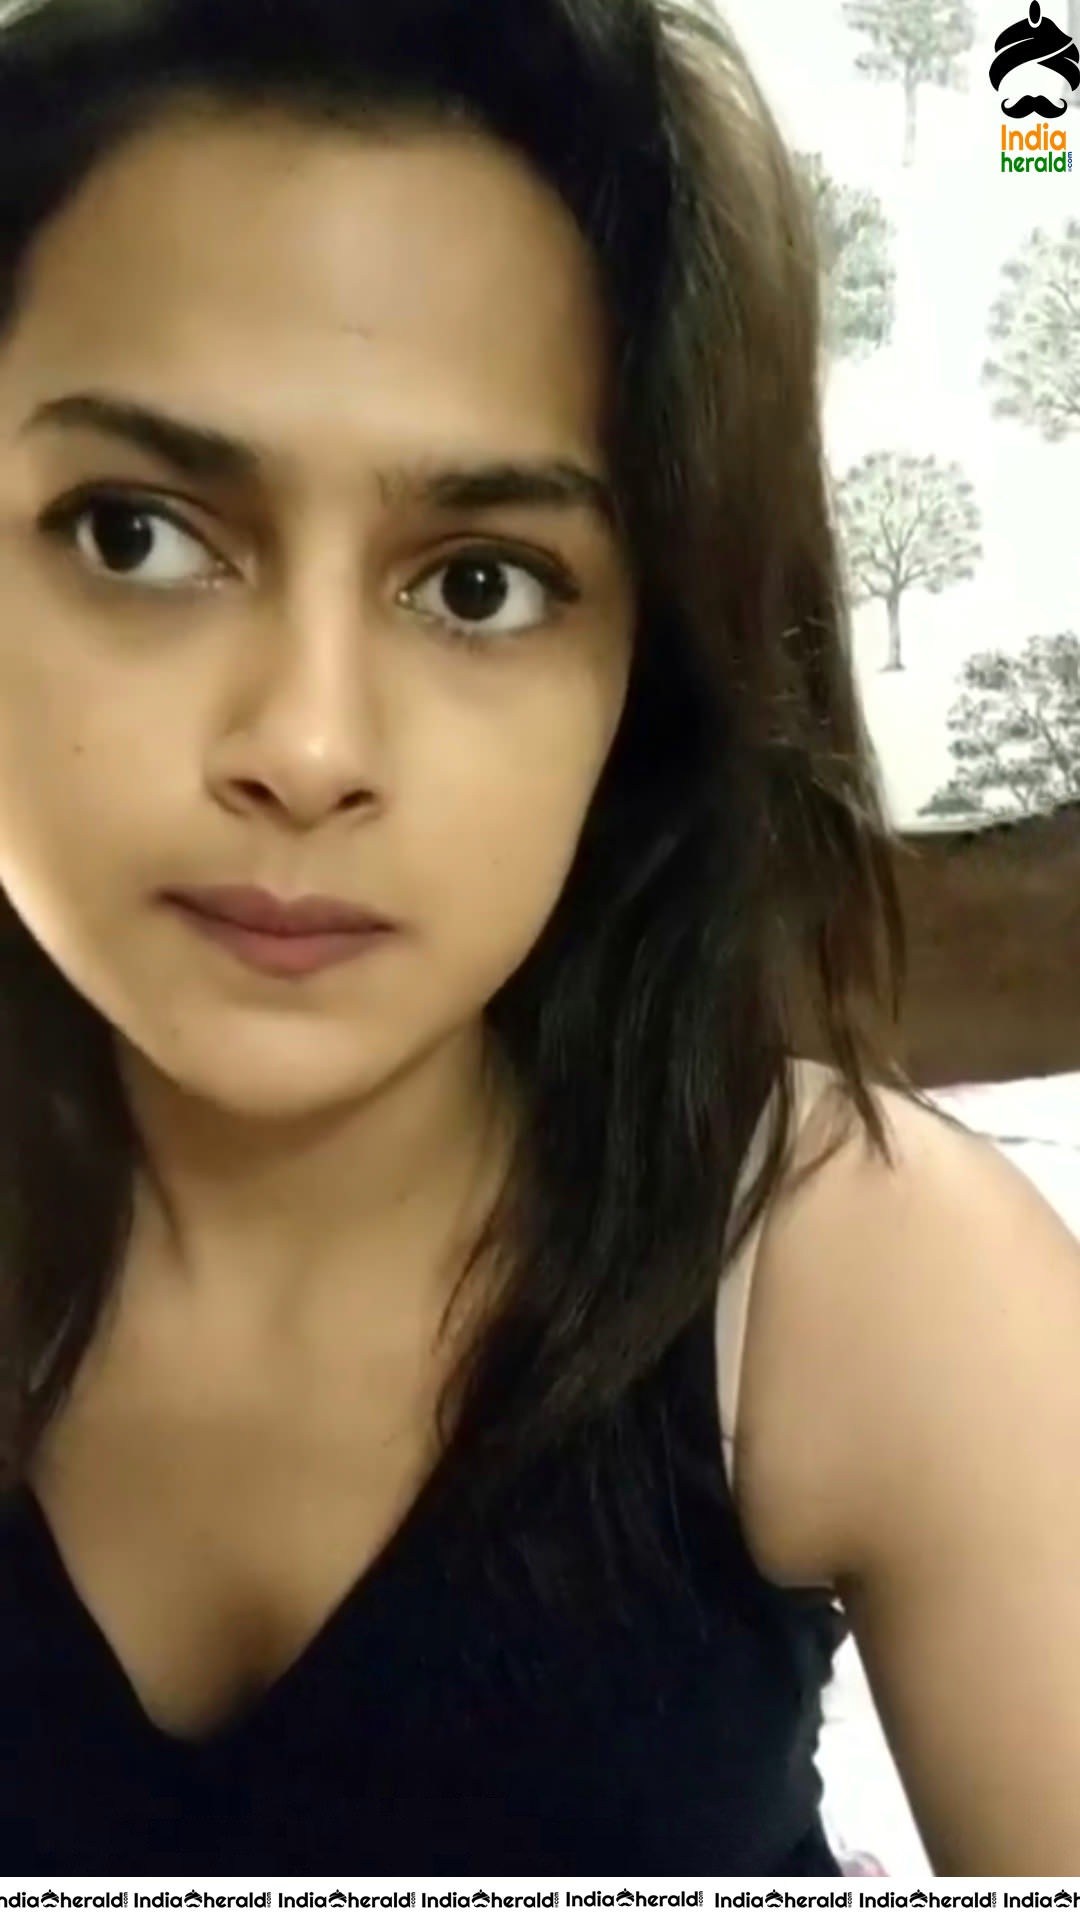 LEAKED HOT PHOTOS of Shraddha Srinath Private Bedroom Video Chat